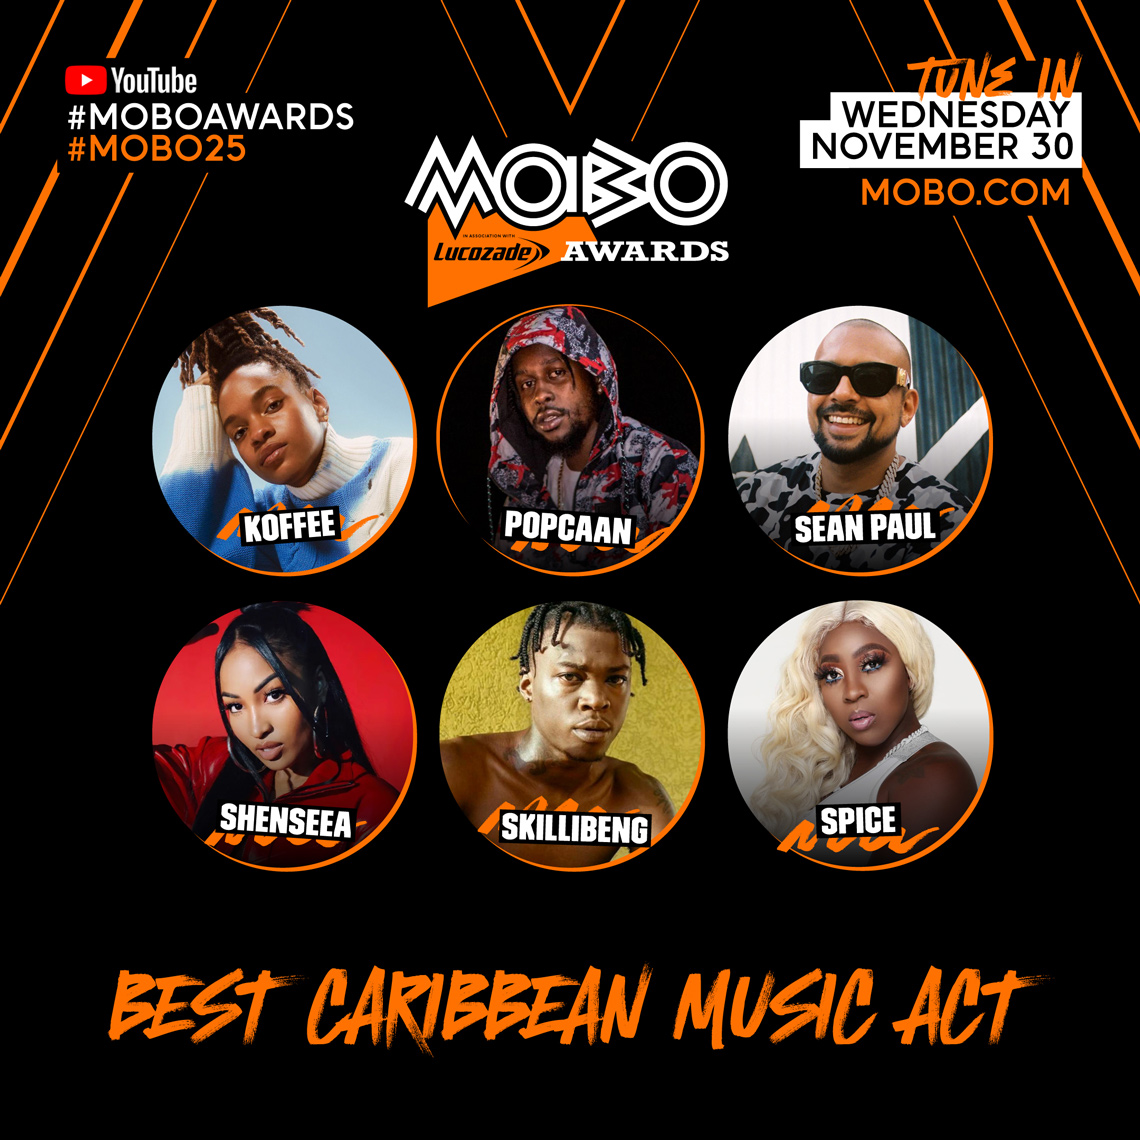 MOBO Awards 2022 Nomination for Koffee, Popcaan, Spice, Sean Paul